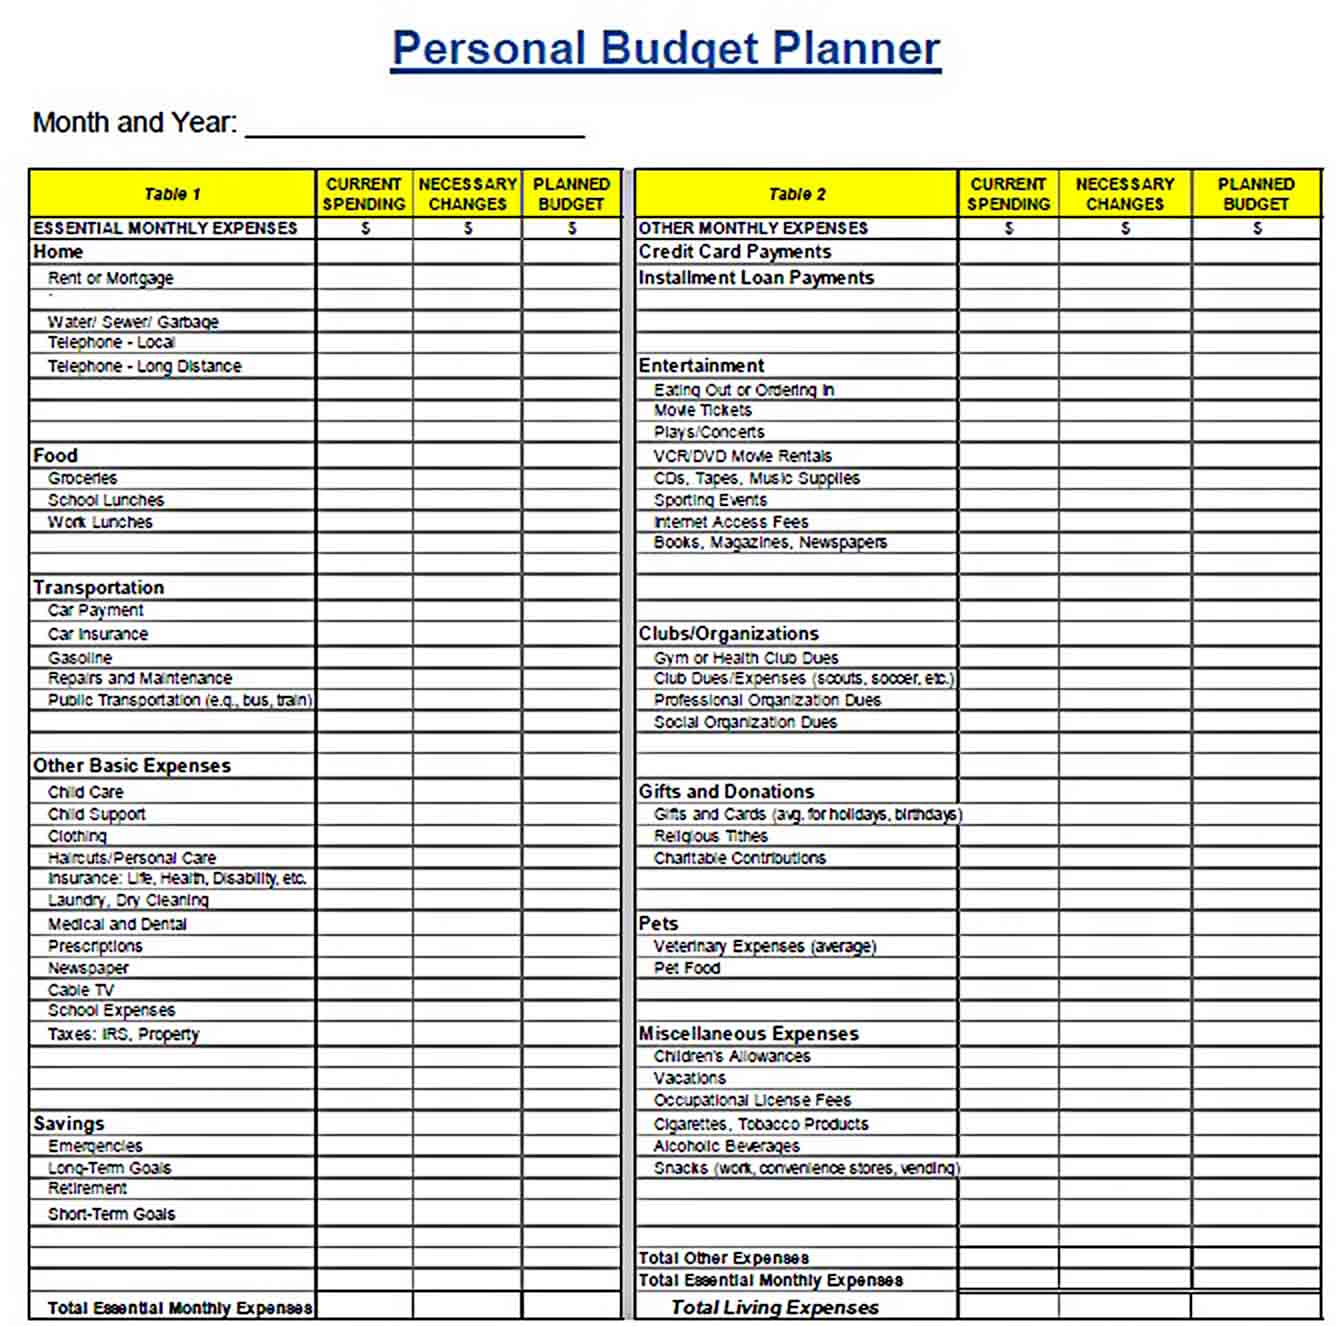 Professional Finance Budget Planner Template